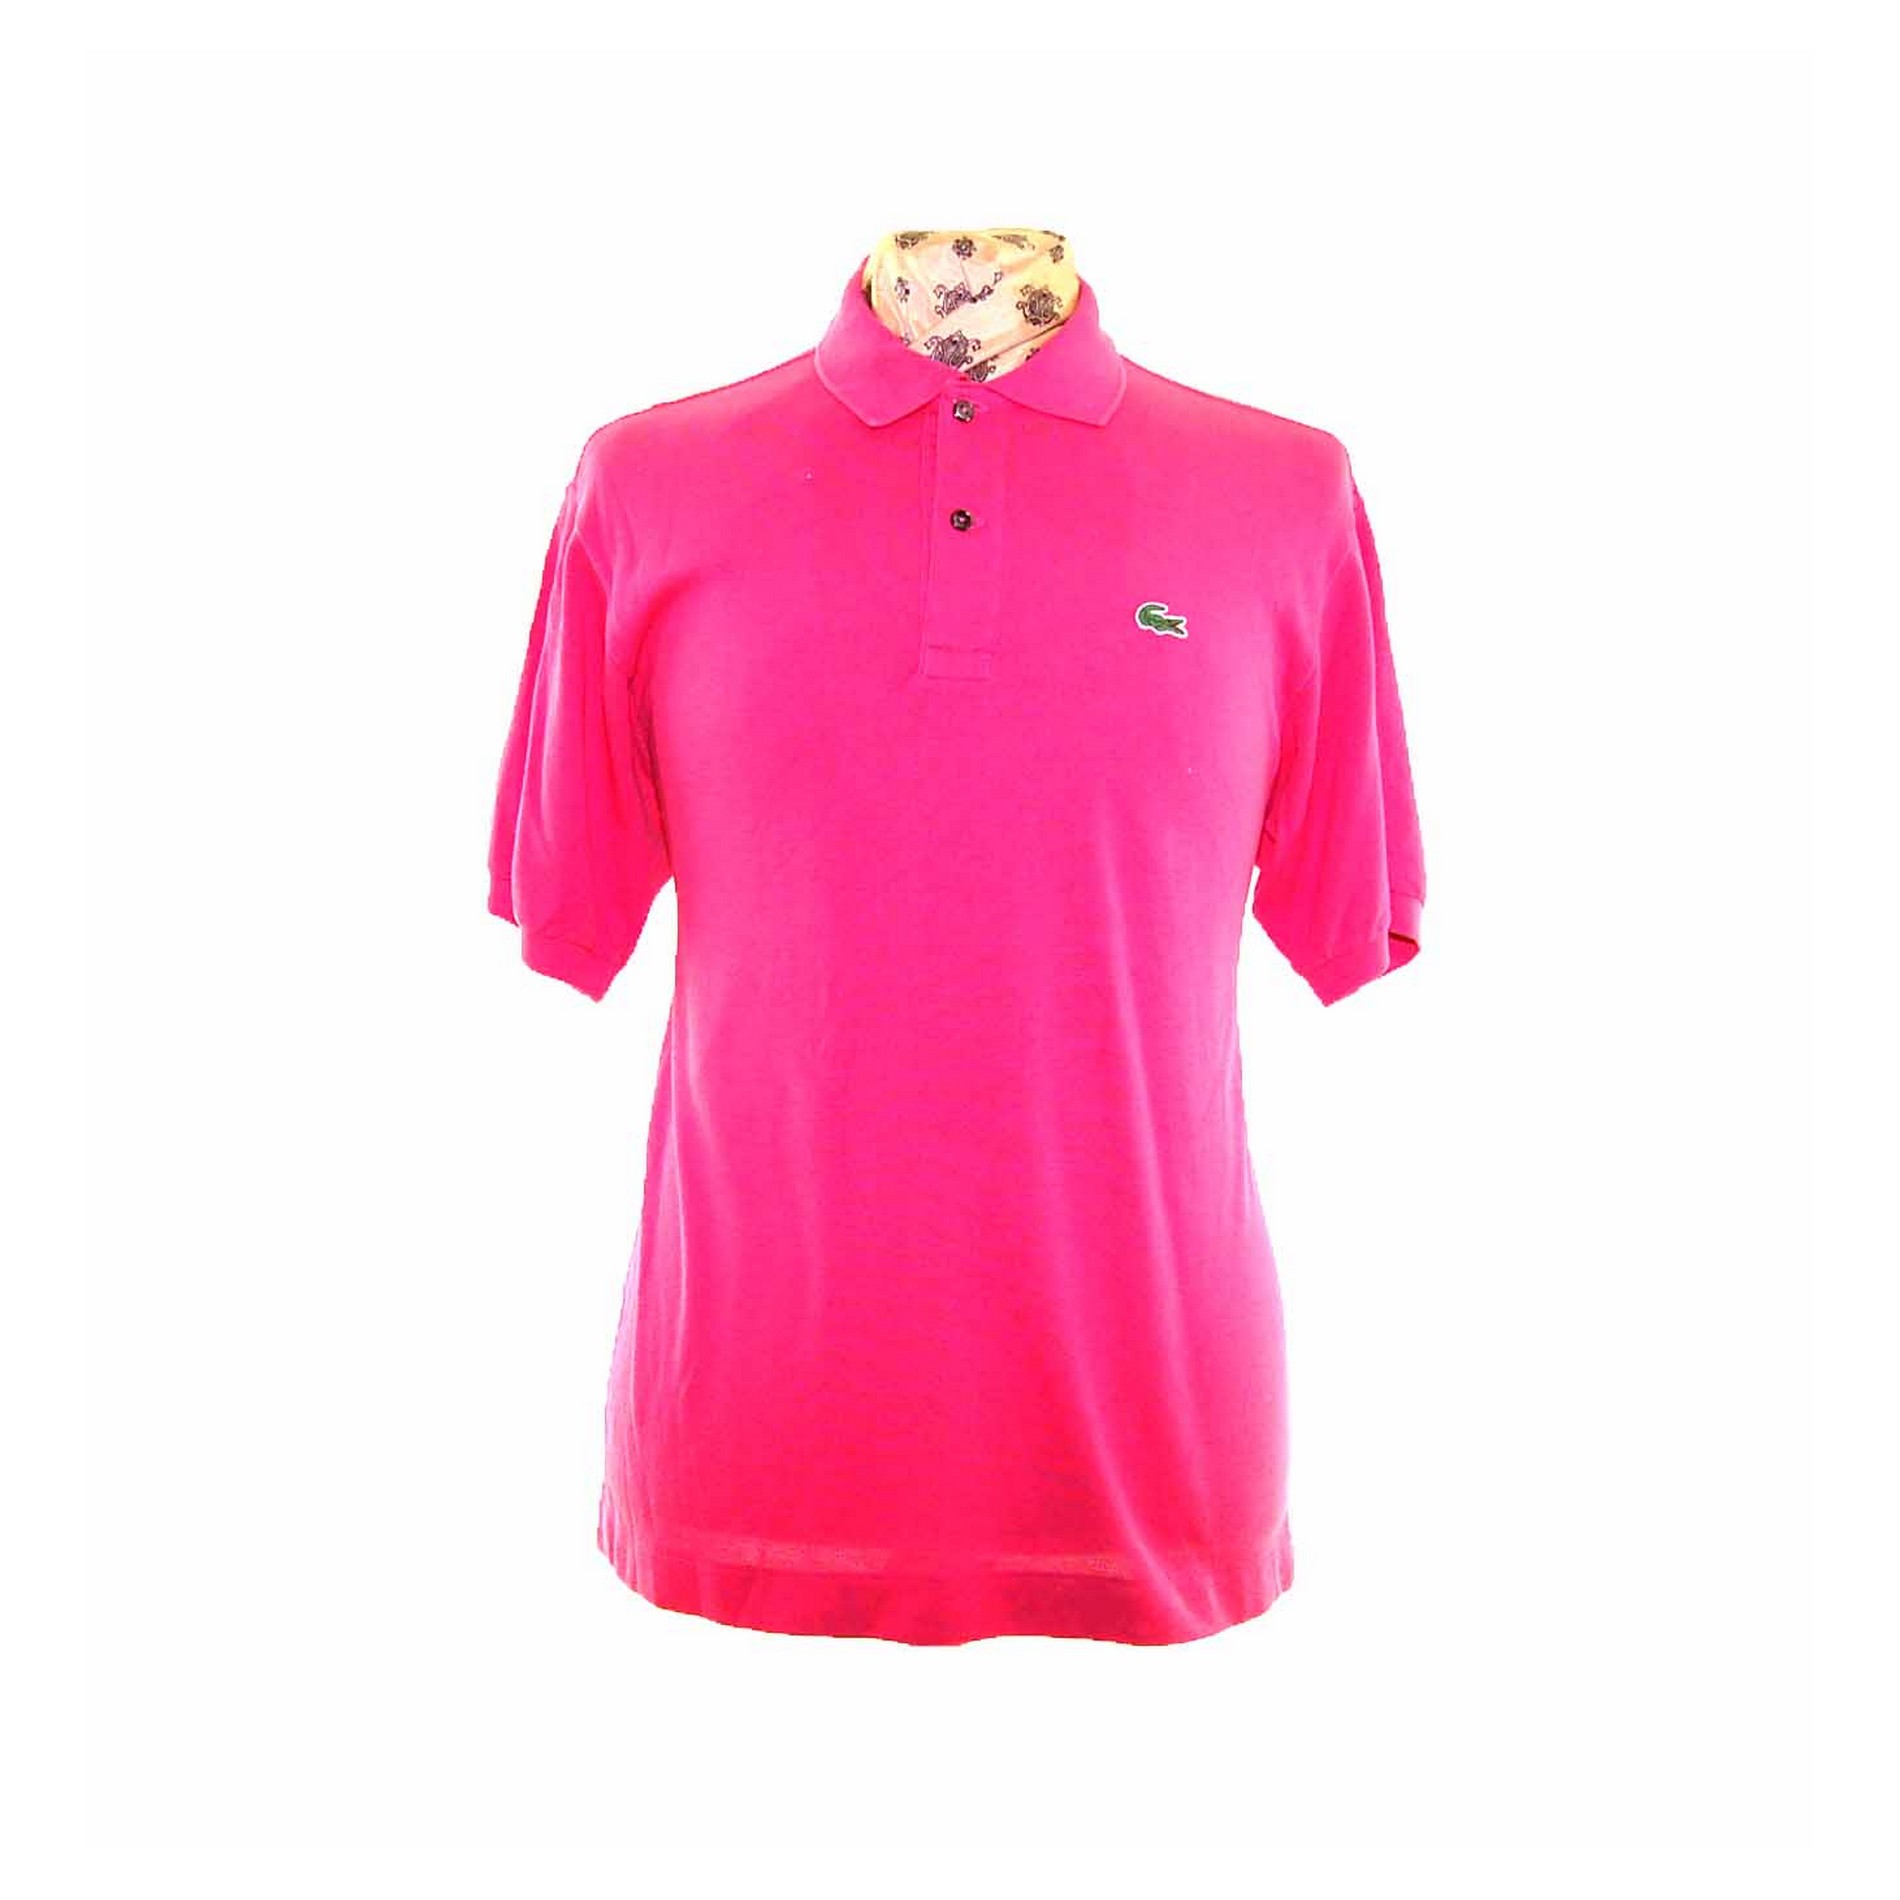 Lacoste Pink Polo Shirt with short sleeves - Blue 17 Vintage Clothing